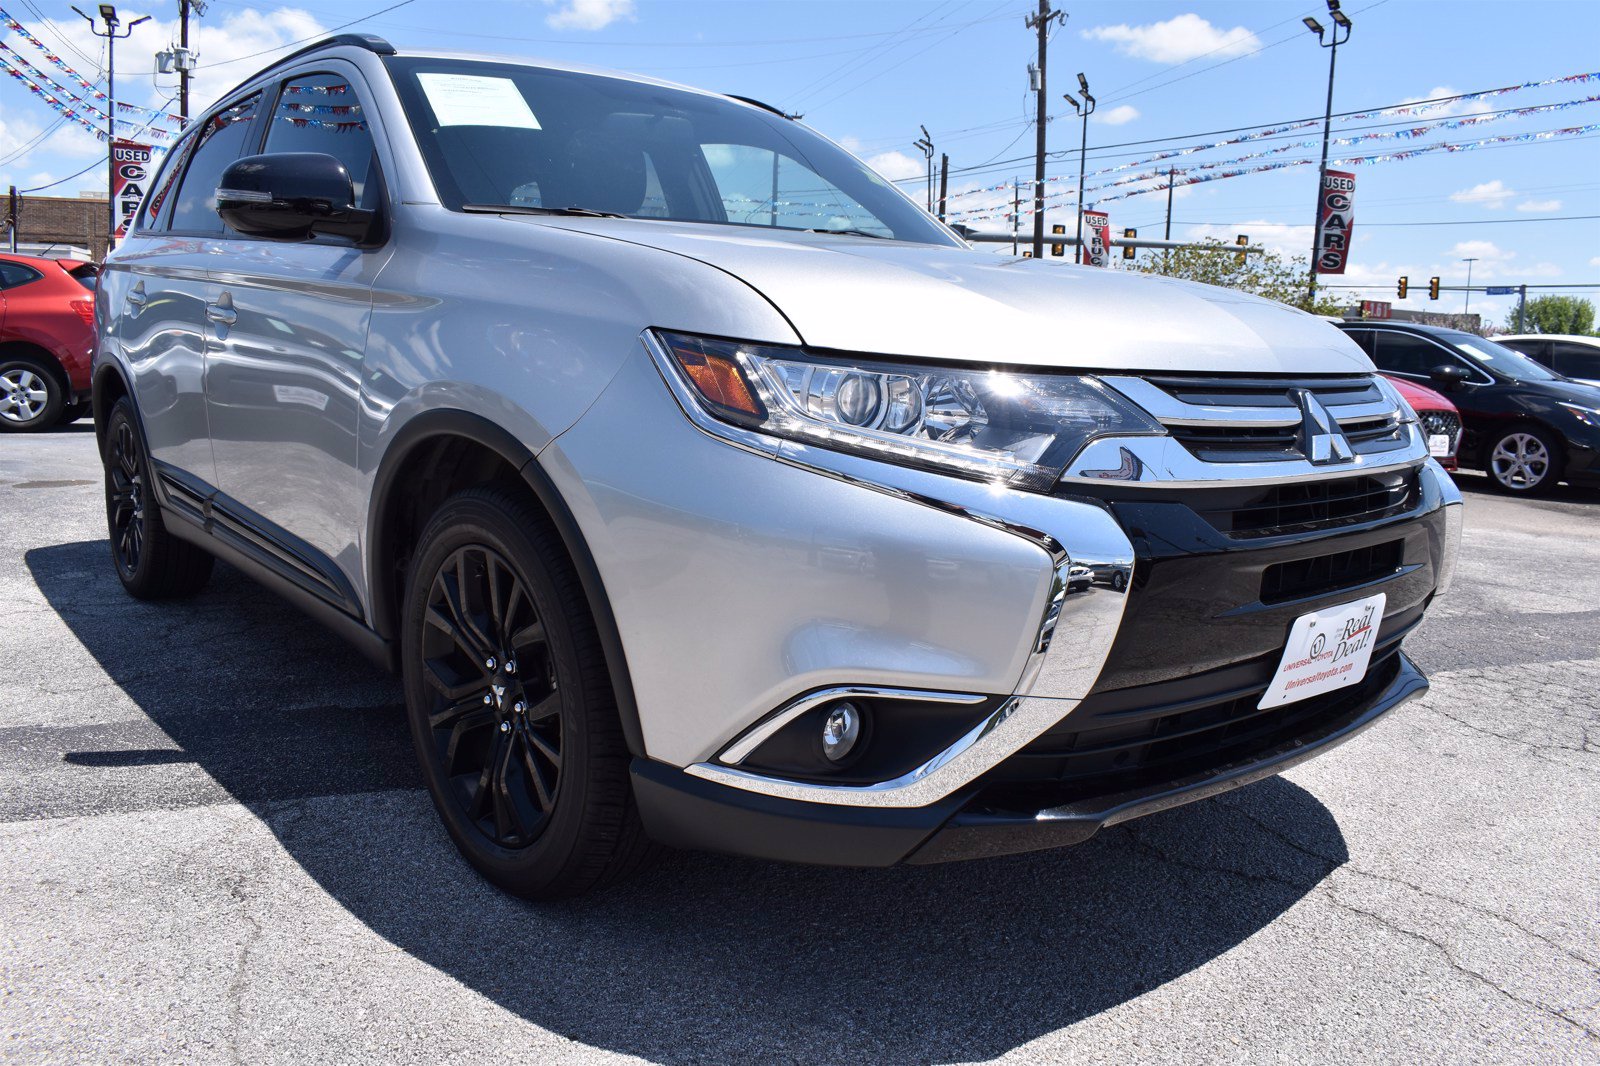 PreOwned 2018 Mitsubishi Outlander SEL Sport Utility in